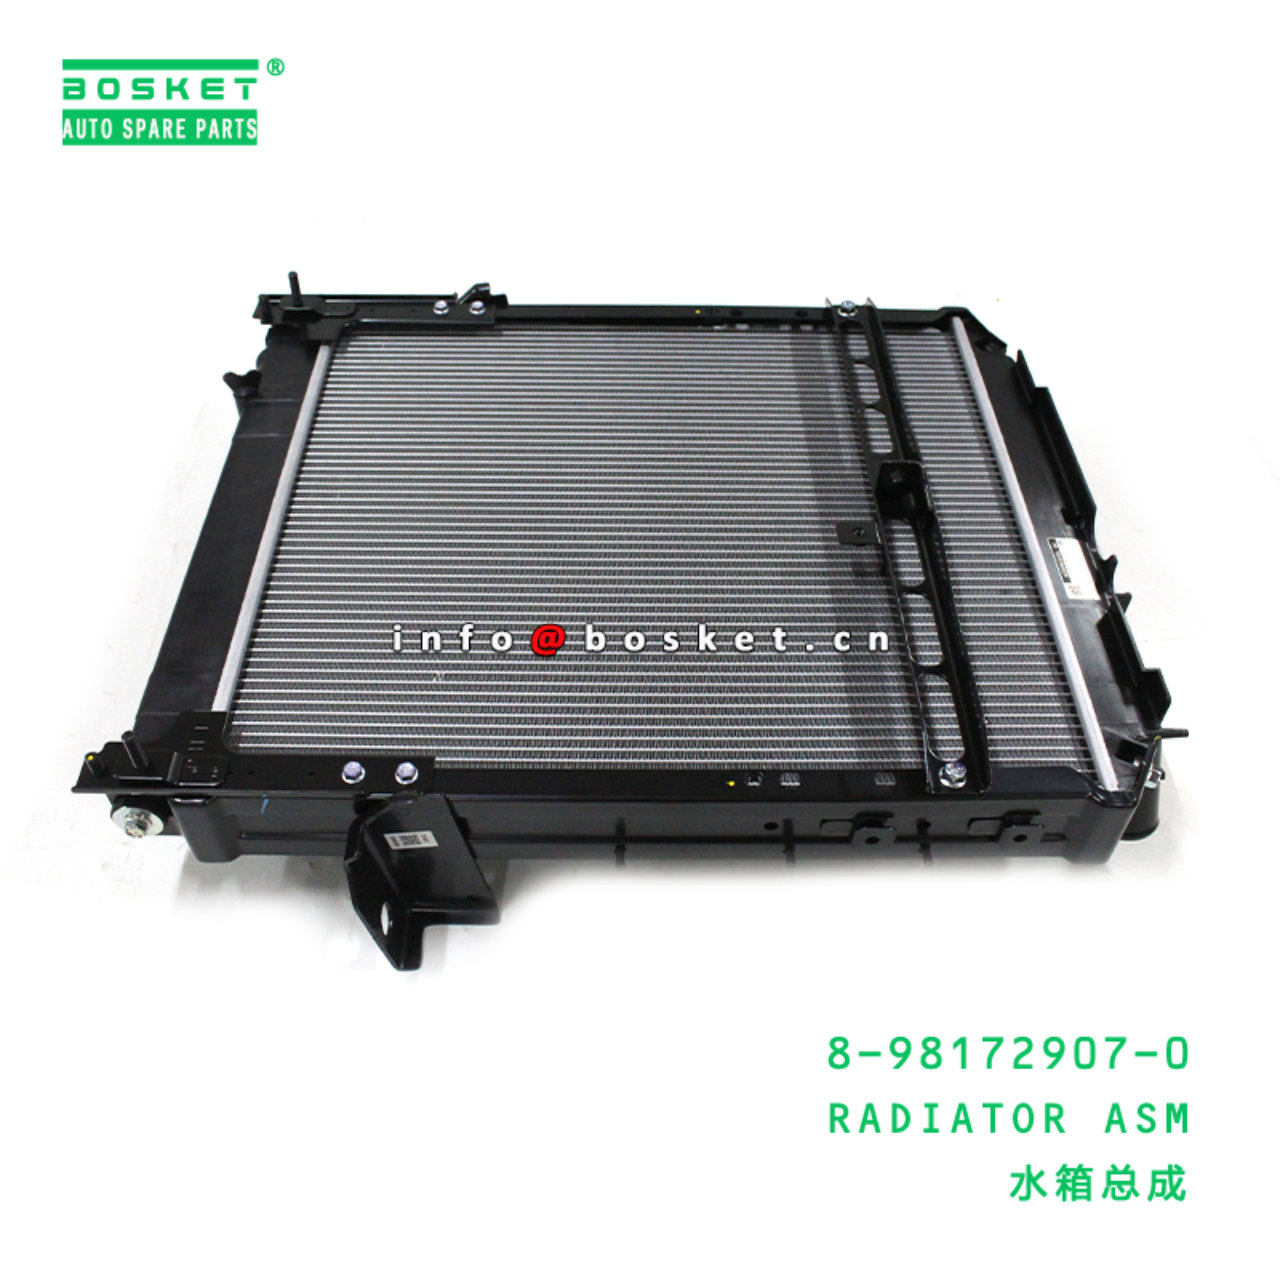 8-98172907-0 Radiator Assembly Suitable for ISUZU NLR 8981729070